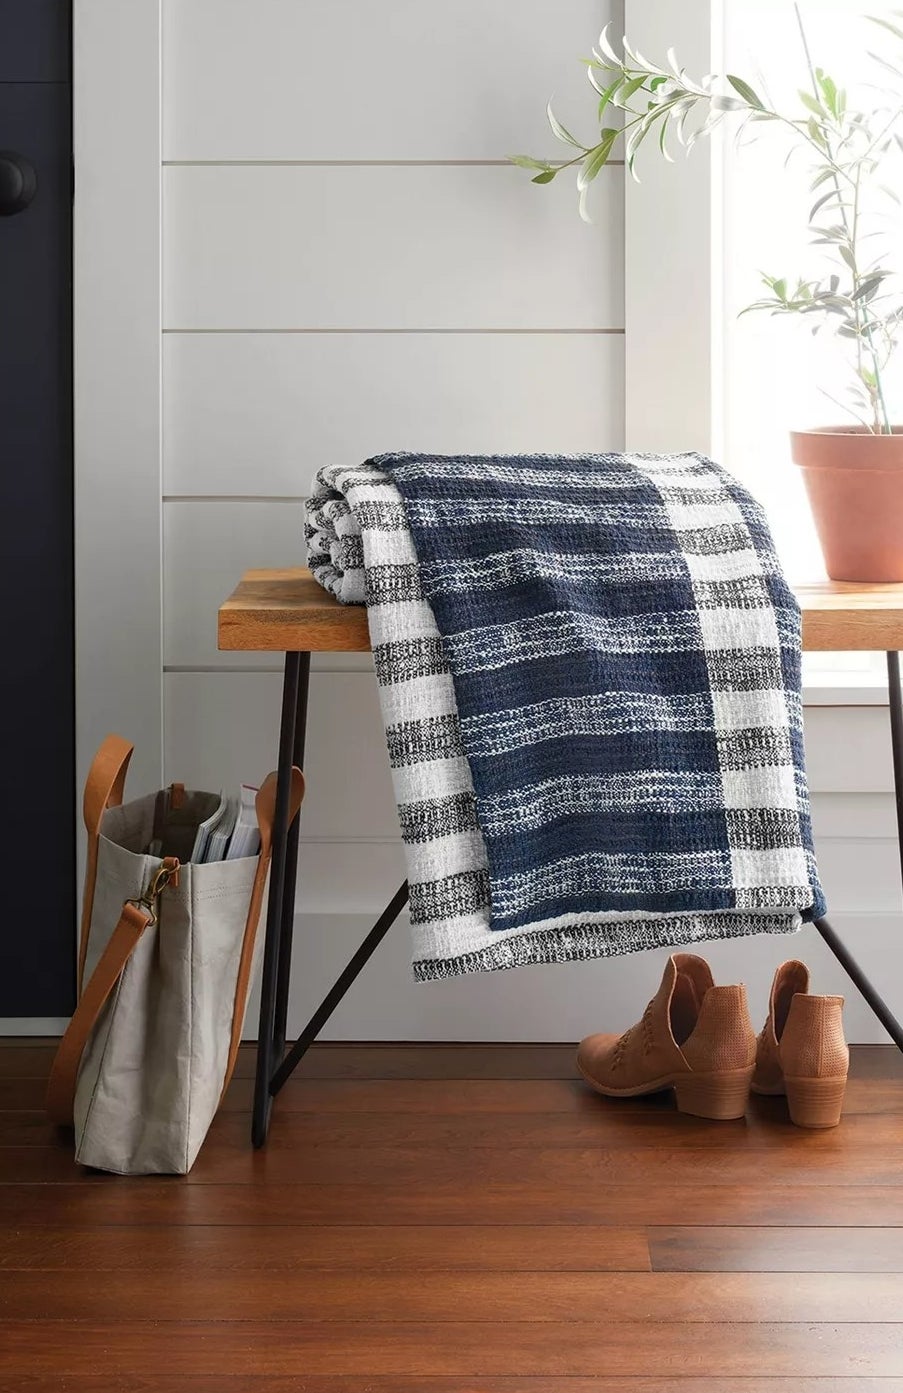 The blue and cream striped throw with gray and cream trim resting on a table